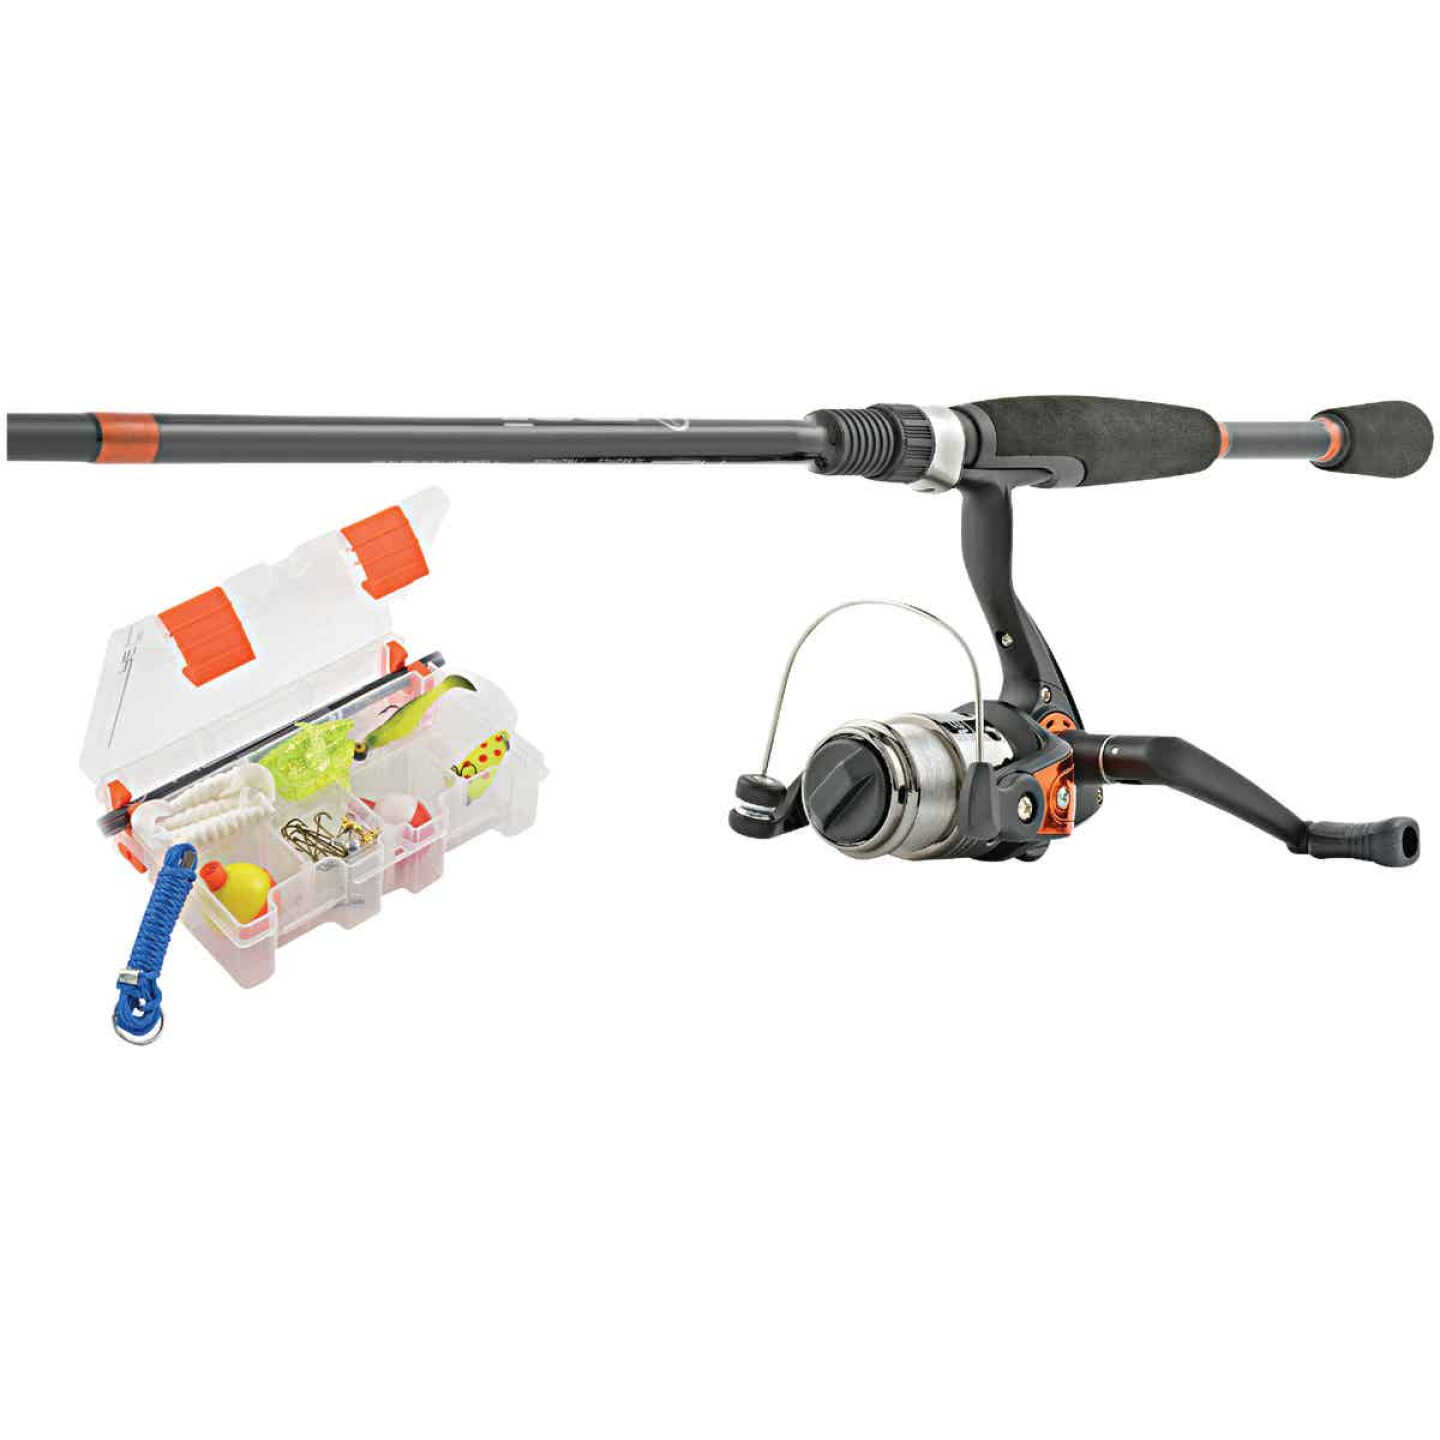 Scope Package # 2 – HH Rods and Reels